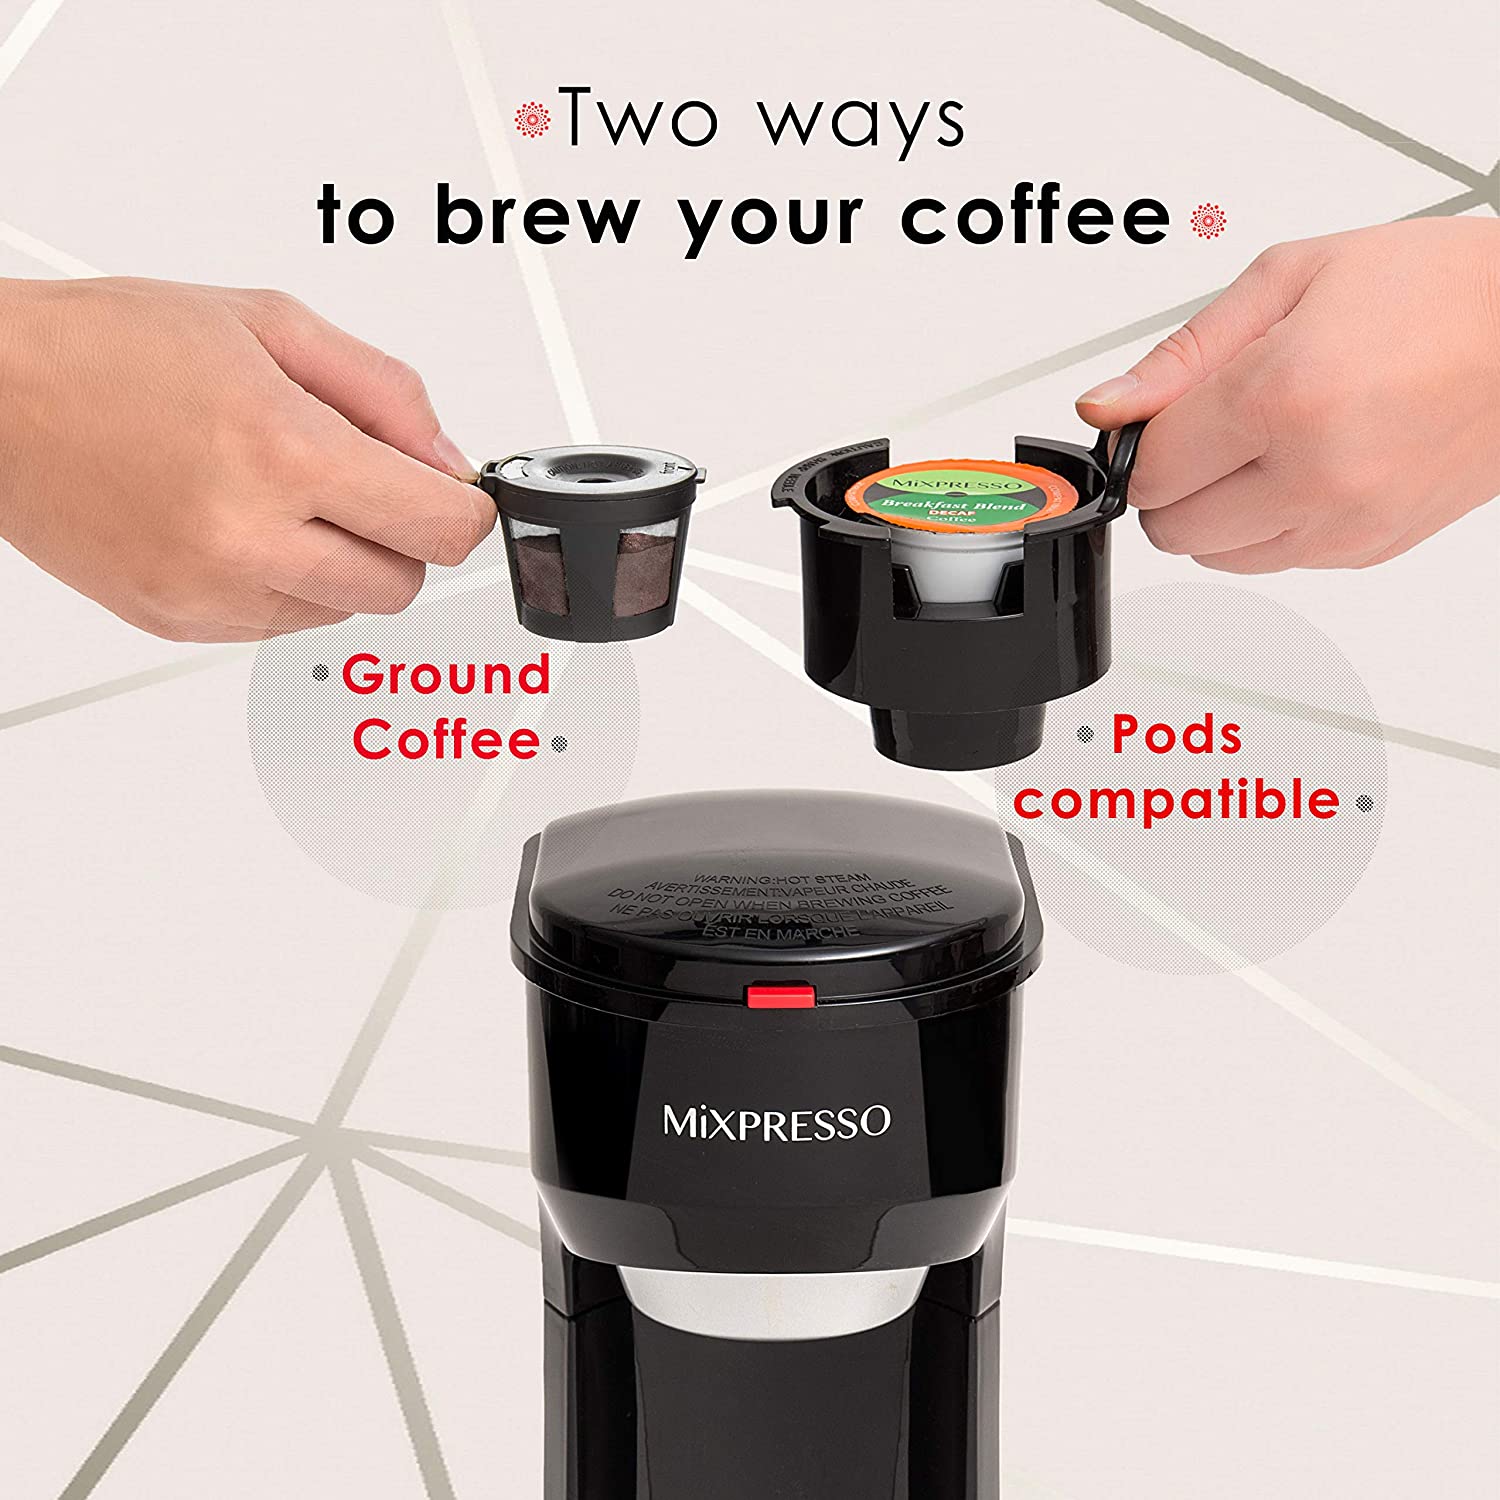 https://bigbigmart.com/wp-content/uploads/2023/07/Mixpresso-2-in-1-Coffee-Brewer-Single-Serve-and-K-Cup-Compatible-Ground-CoffeeCompact-Size-Mini-Coffee-Maker-Quick-Brew-Technology-14-oz-black3.jpg